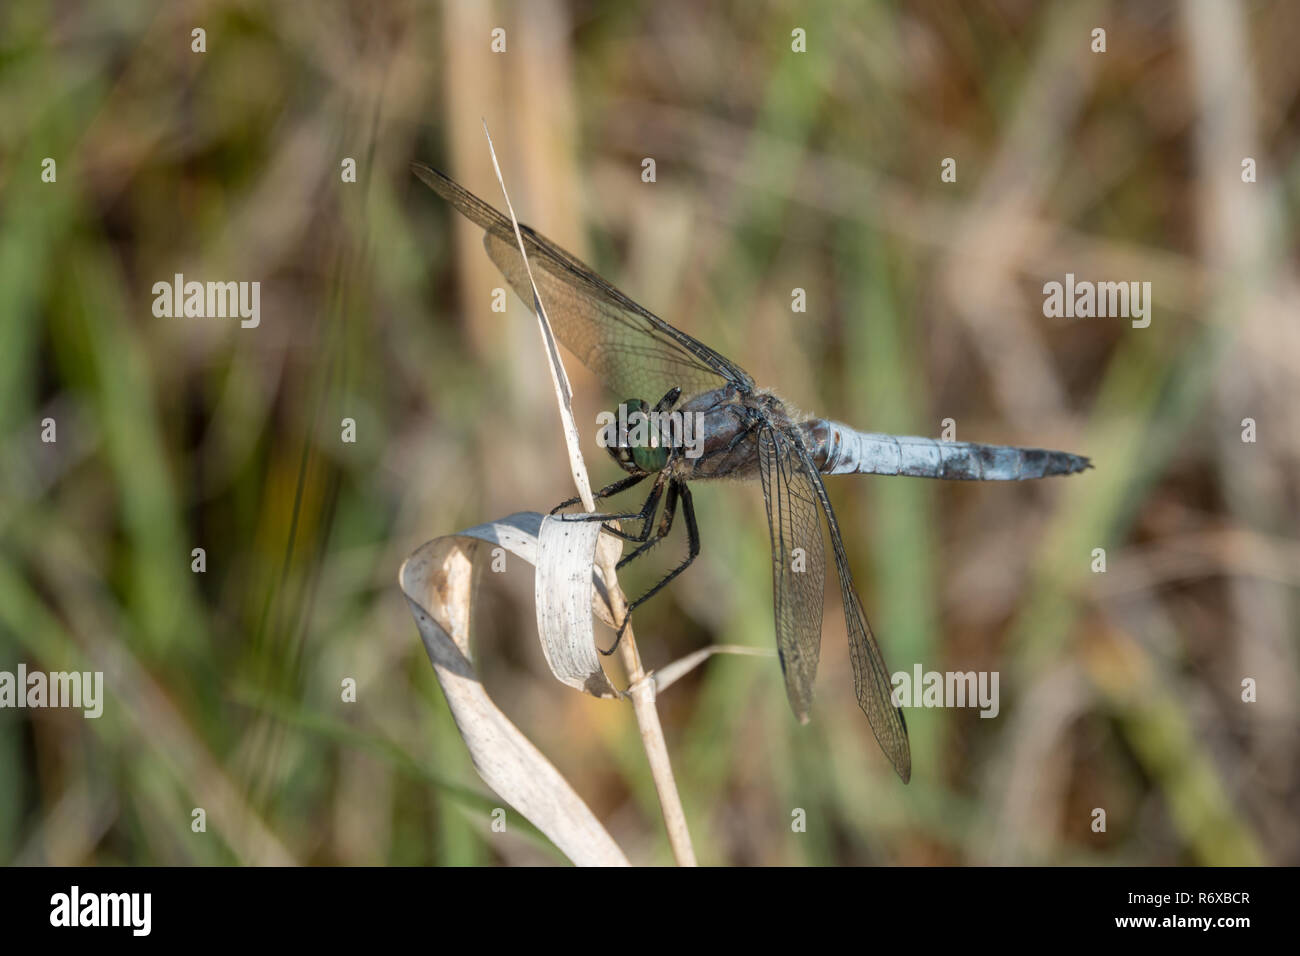 Blue dragonfly on the reed Stock Photo